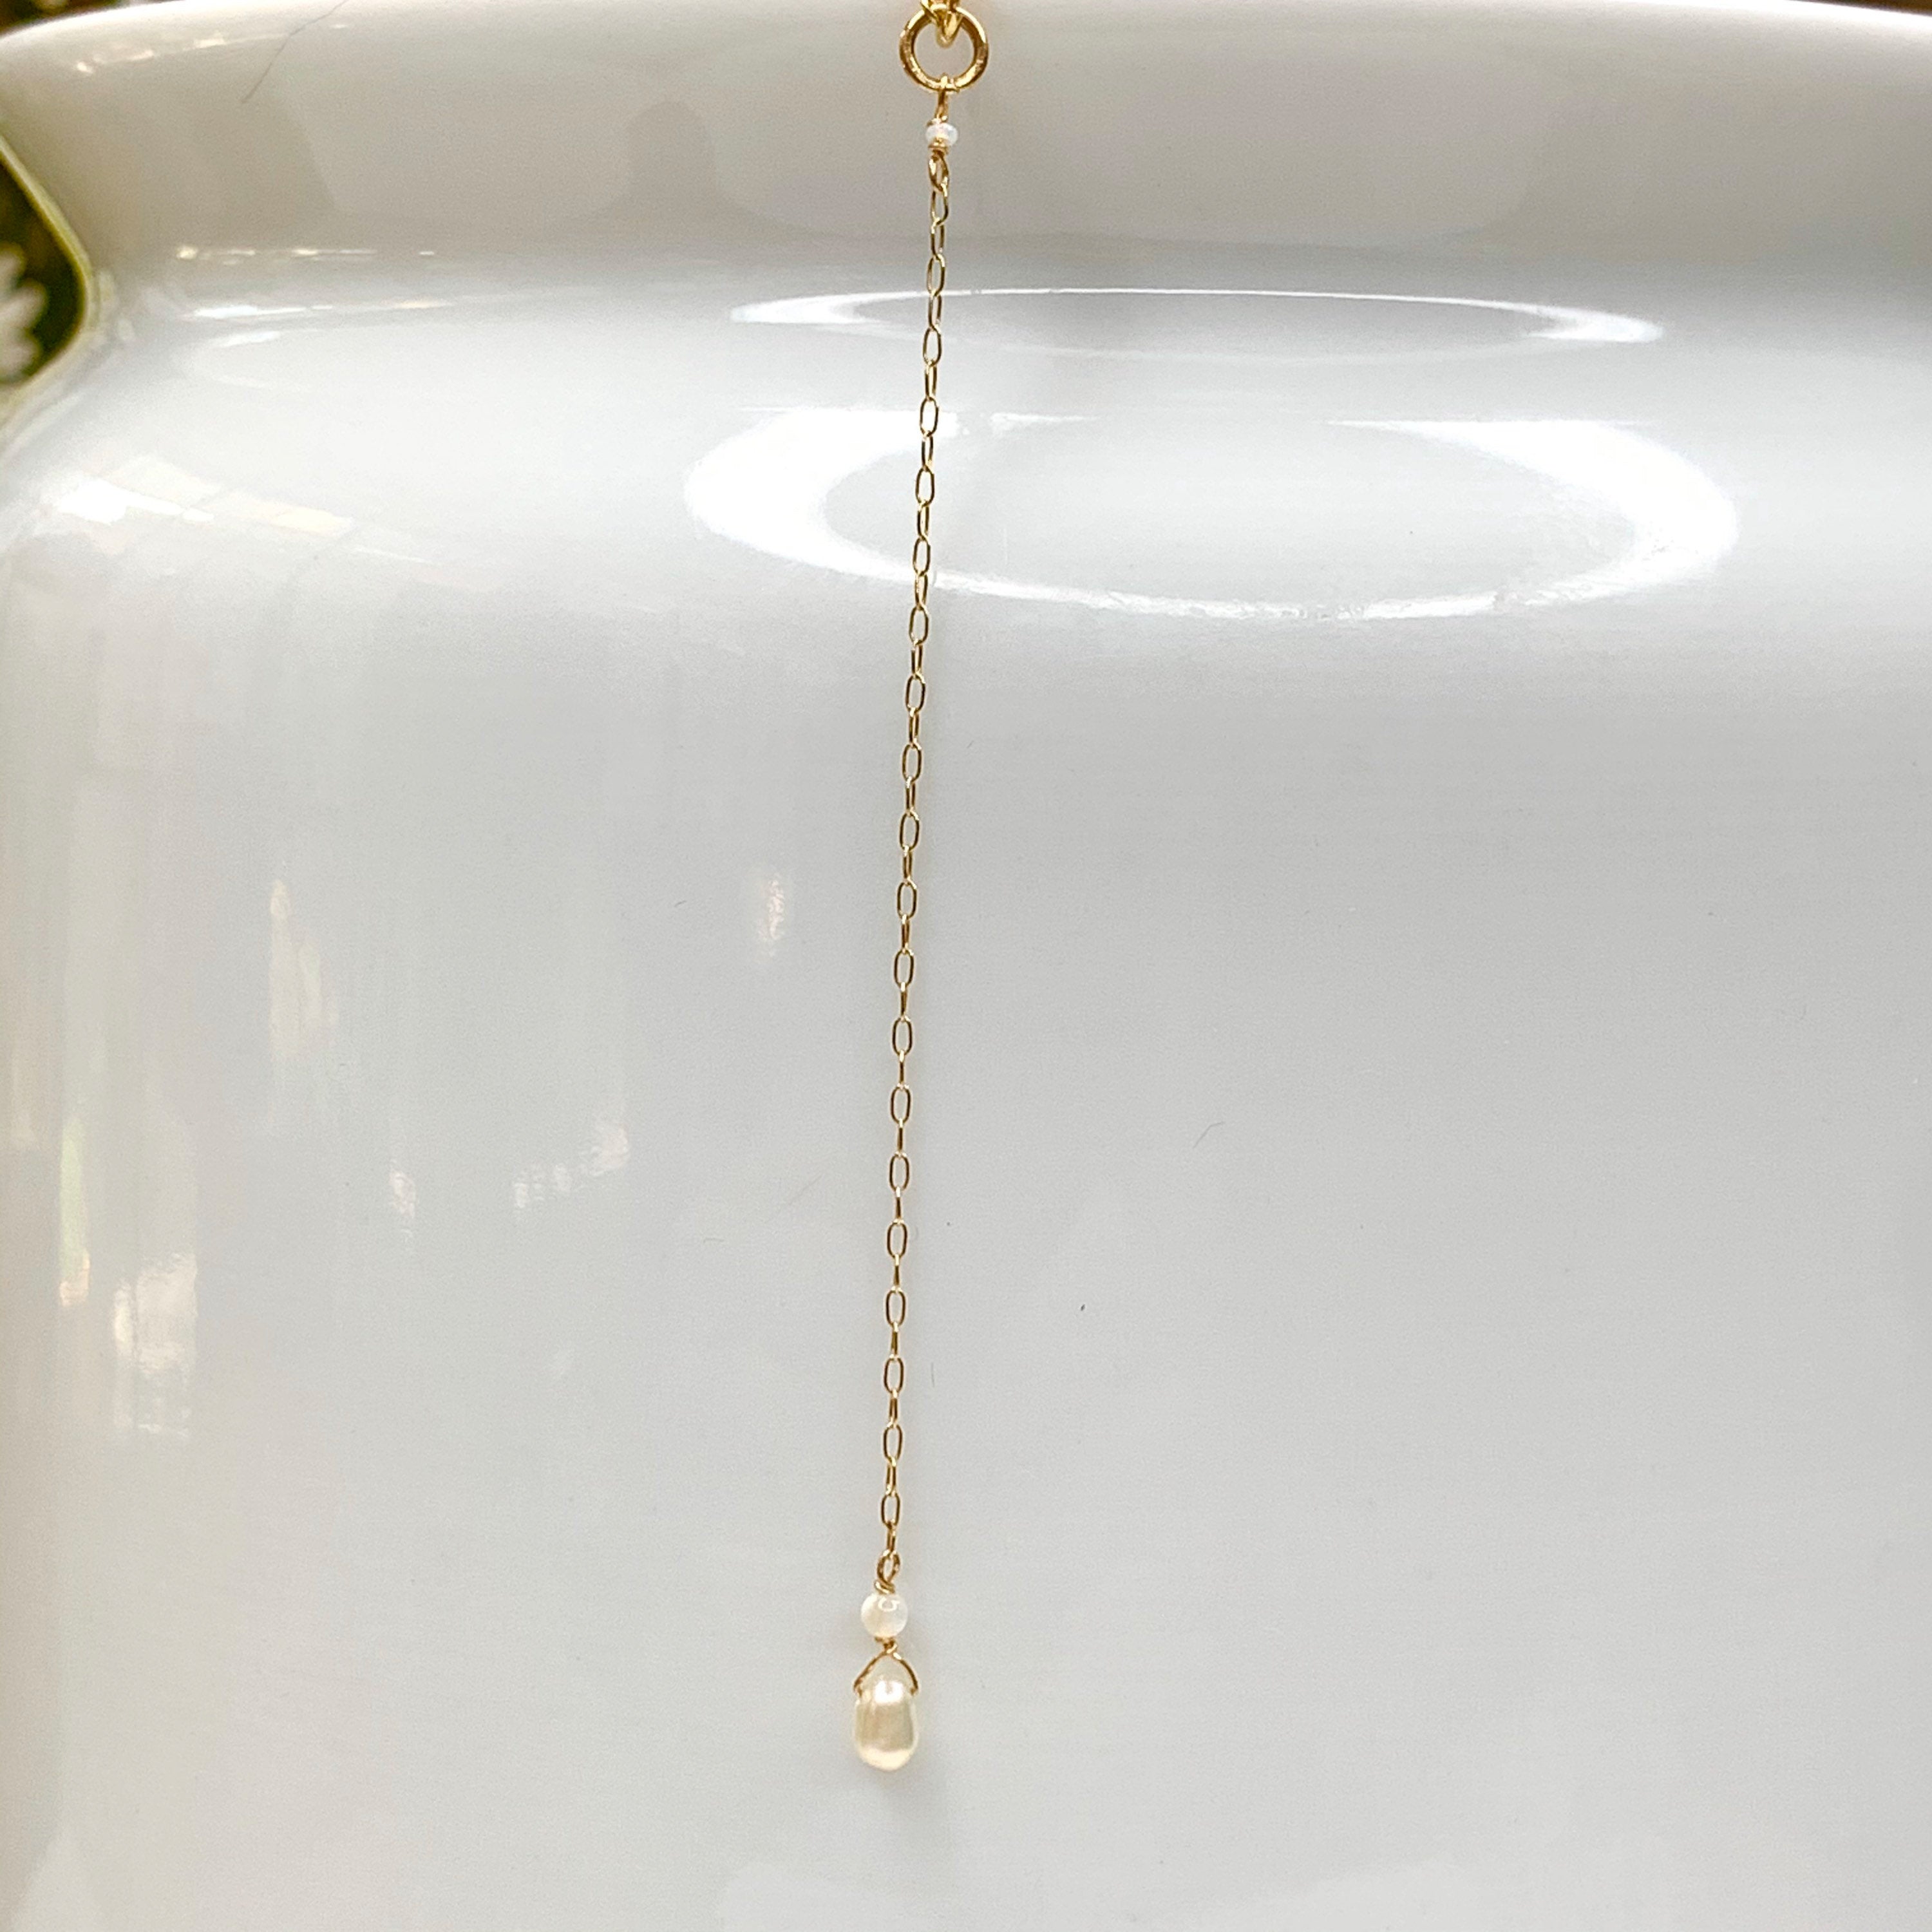 14kt Gold Chain Necklace w/ Antique Italian Beads & Freshwater Pearls